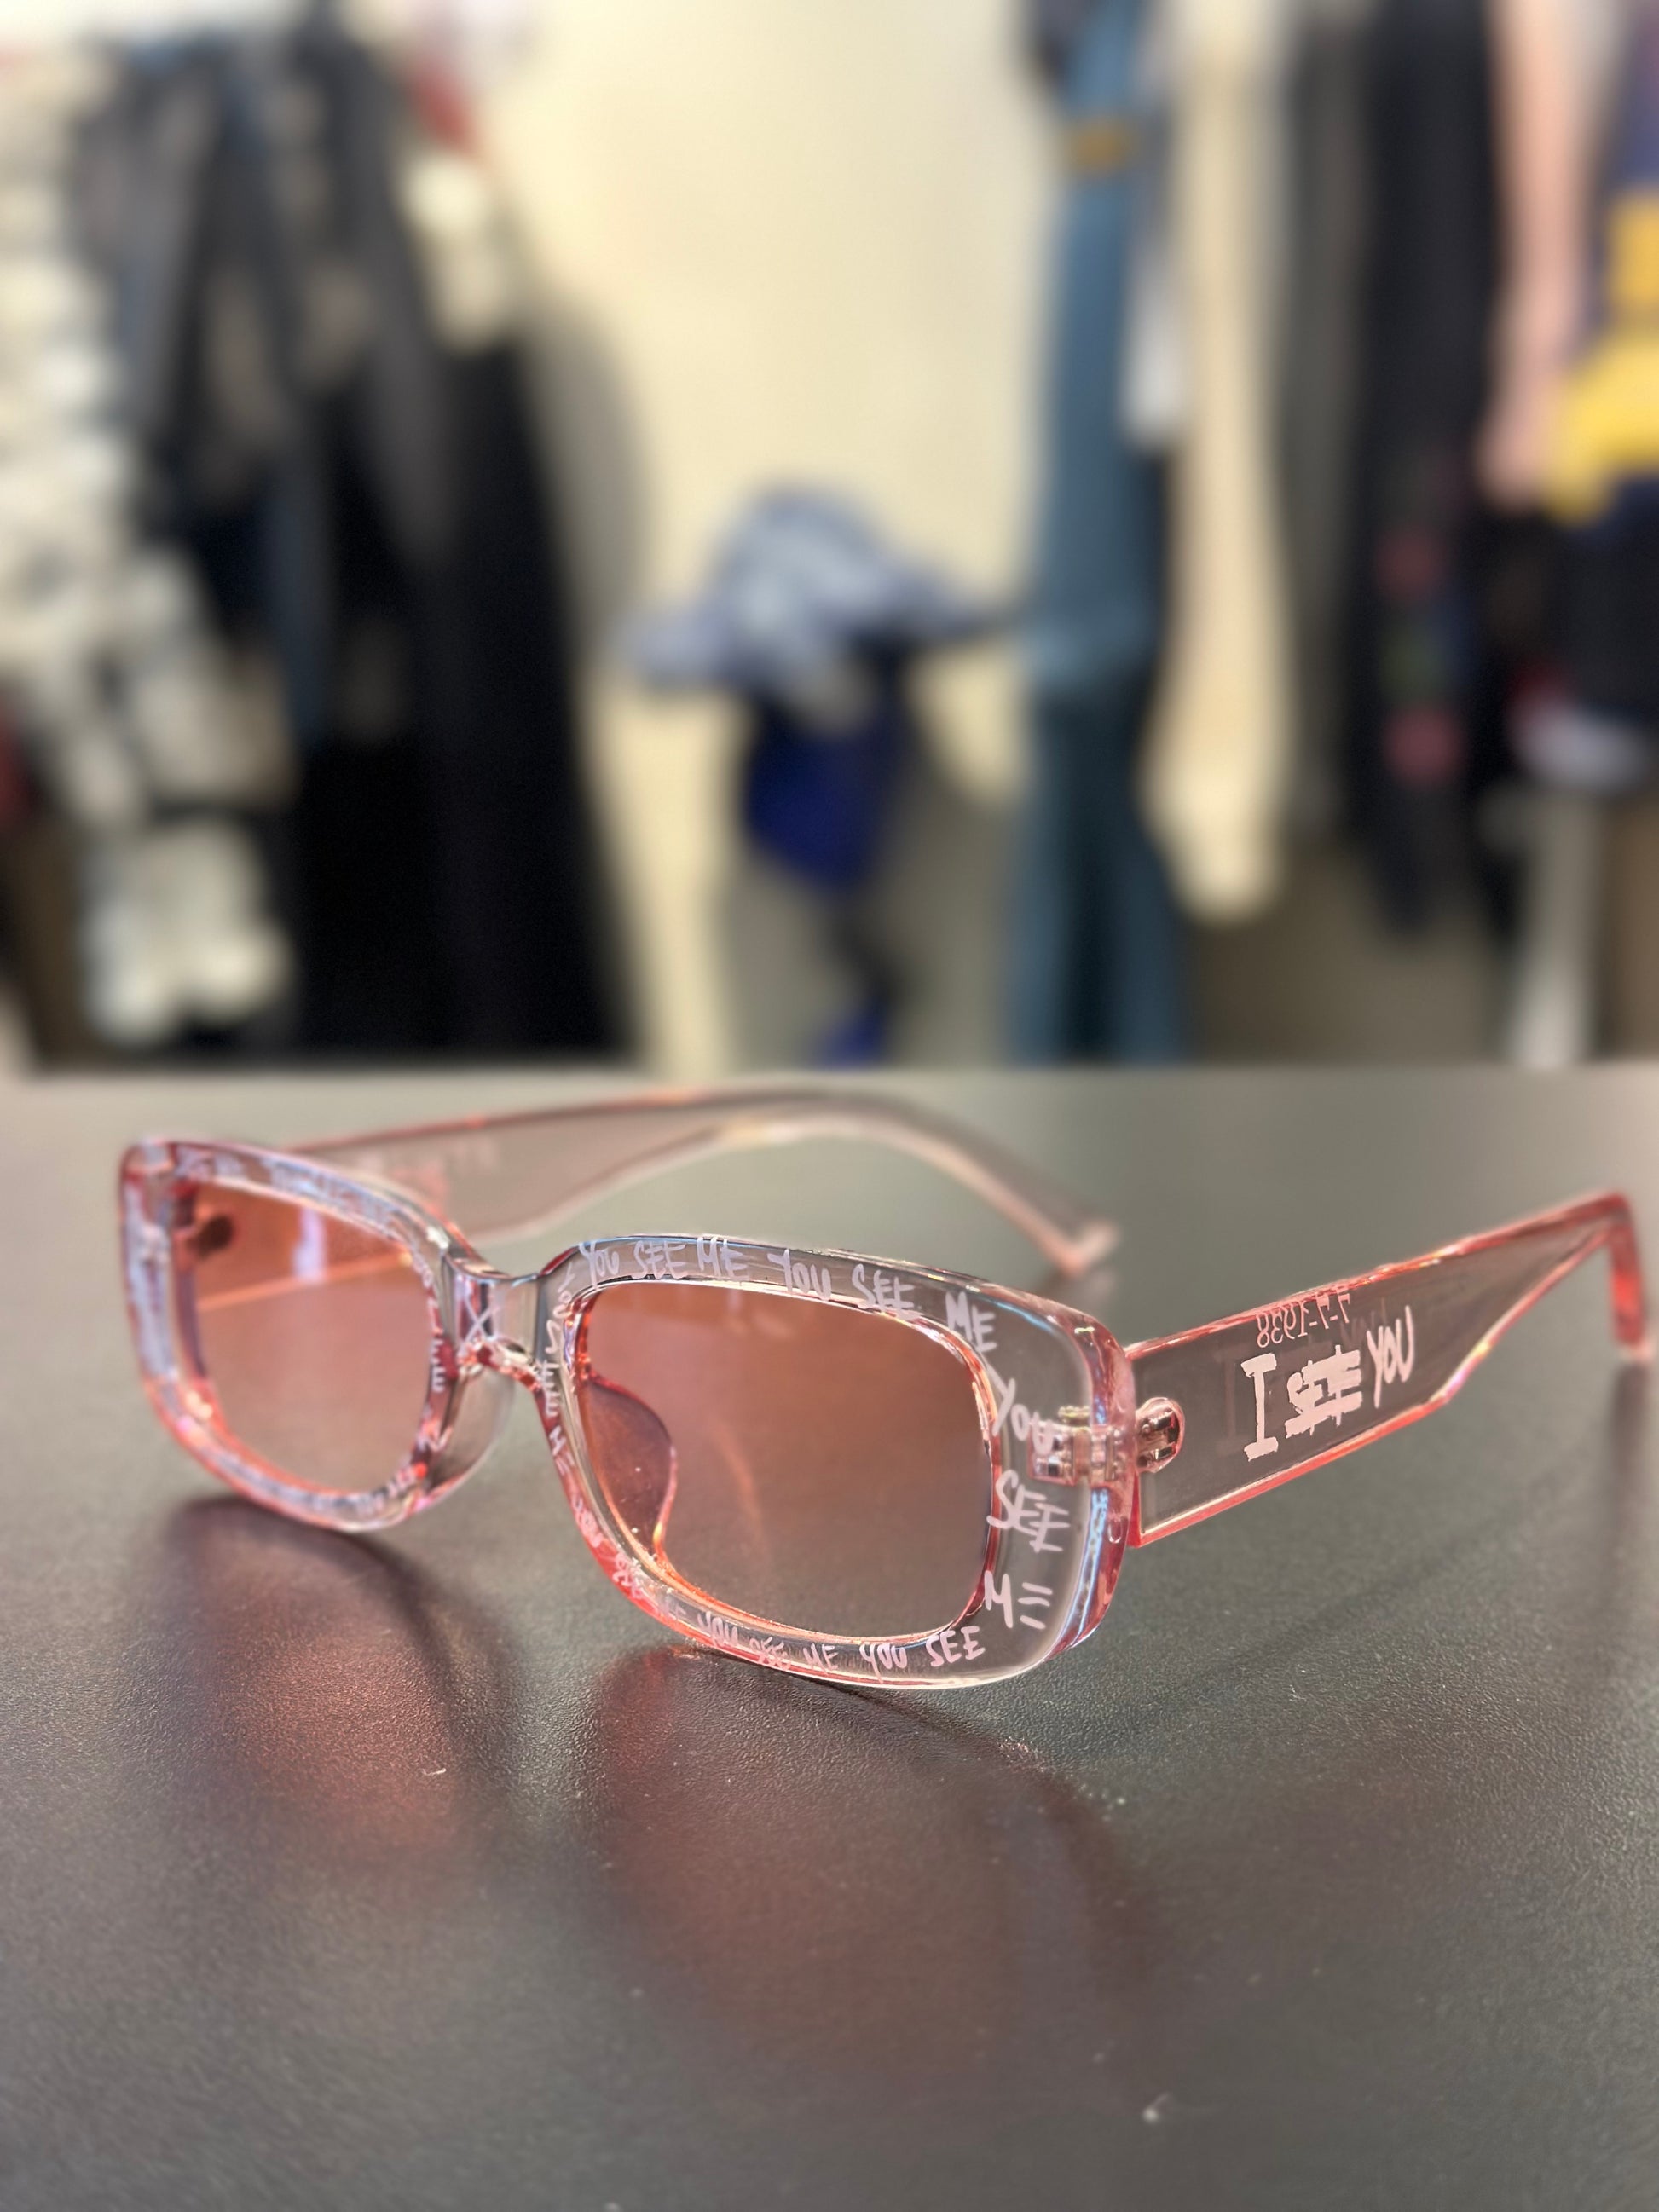  KNOTWTR: I SEE YOU/ RELAX SUNGLASSES (clear light pink)